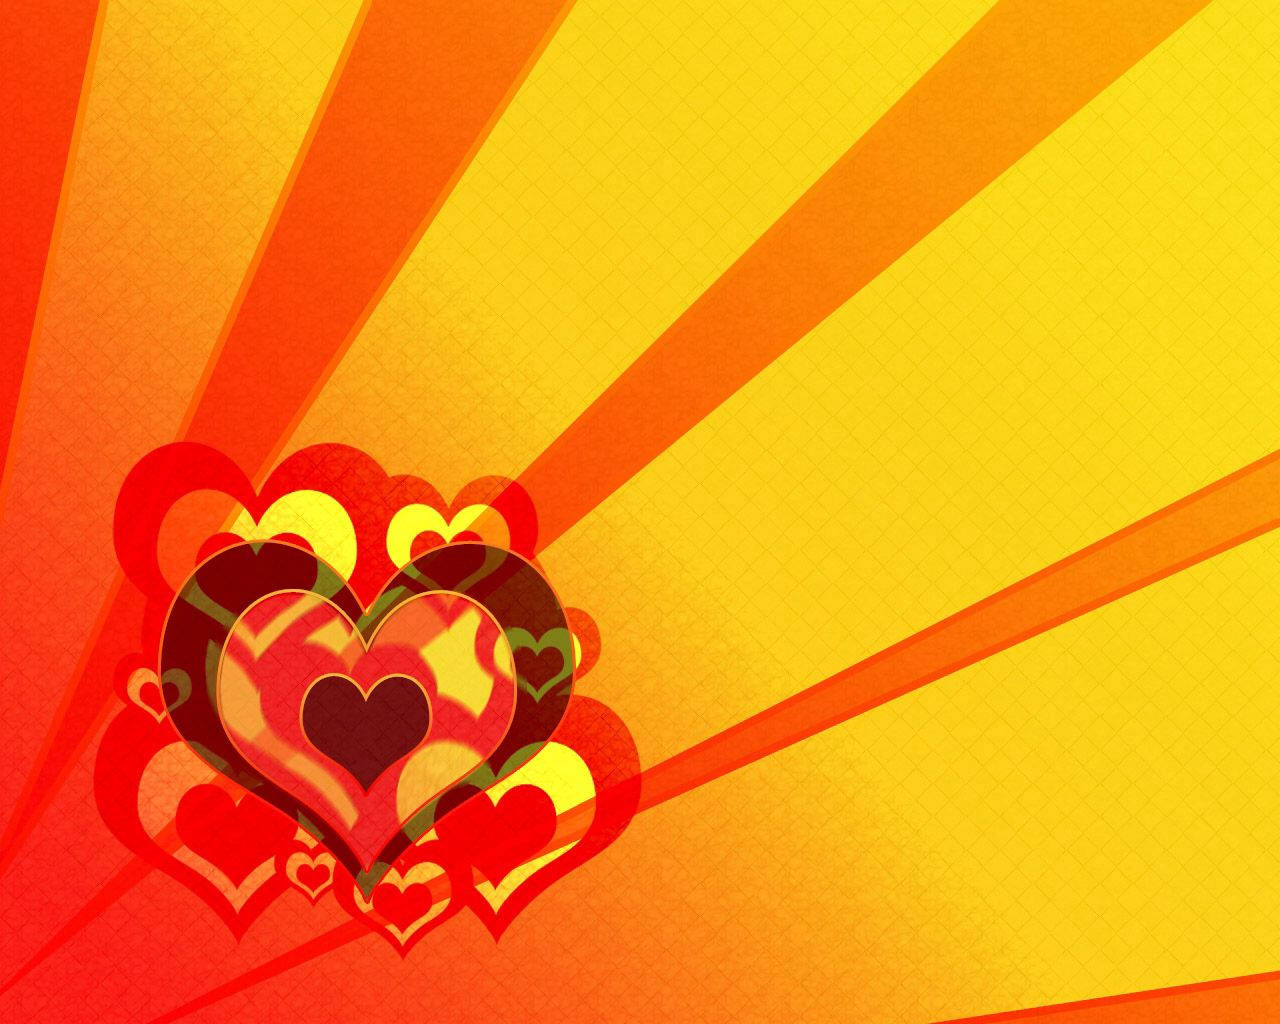 Bunch Of Hearts And Orange Lines Background